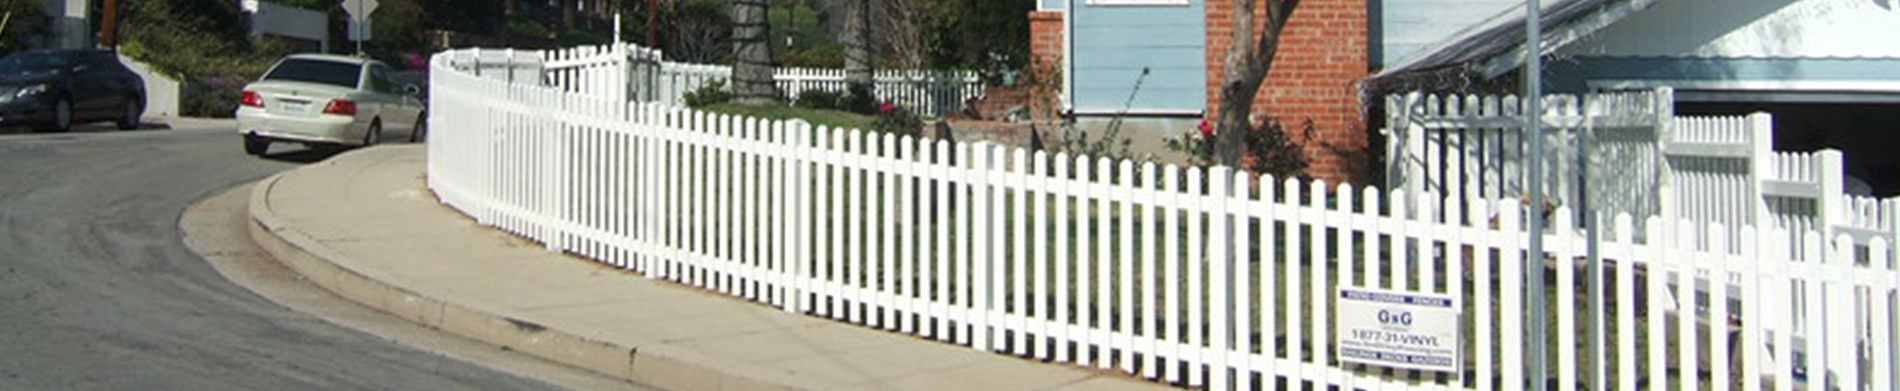 Connect With Top Vinyl Fence Manufacturers for Installing an Affordable Vinyl Fencing